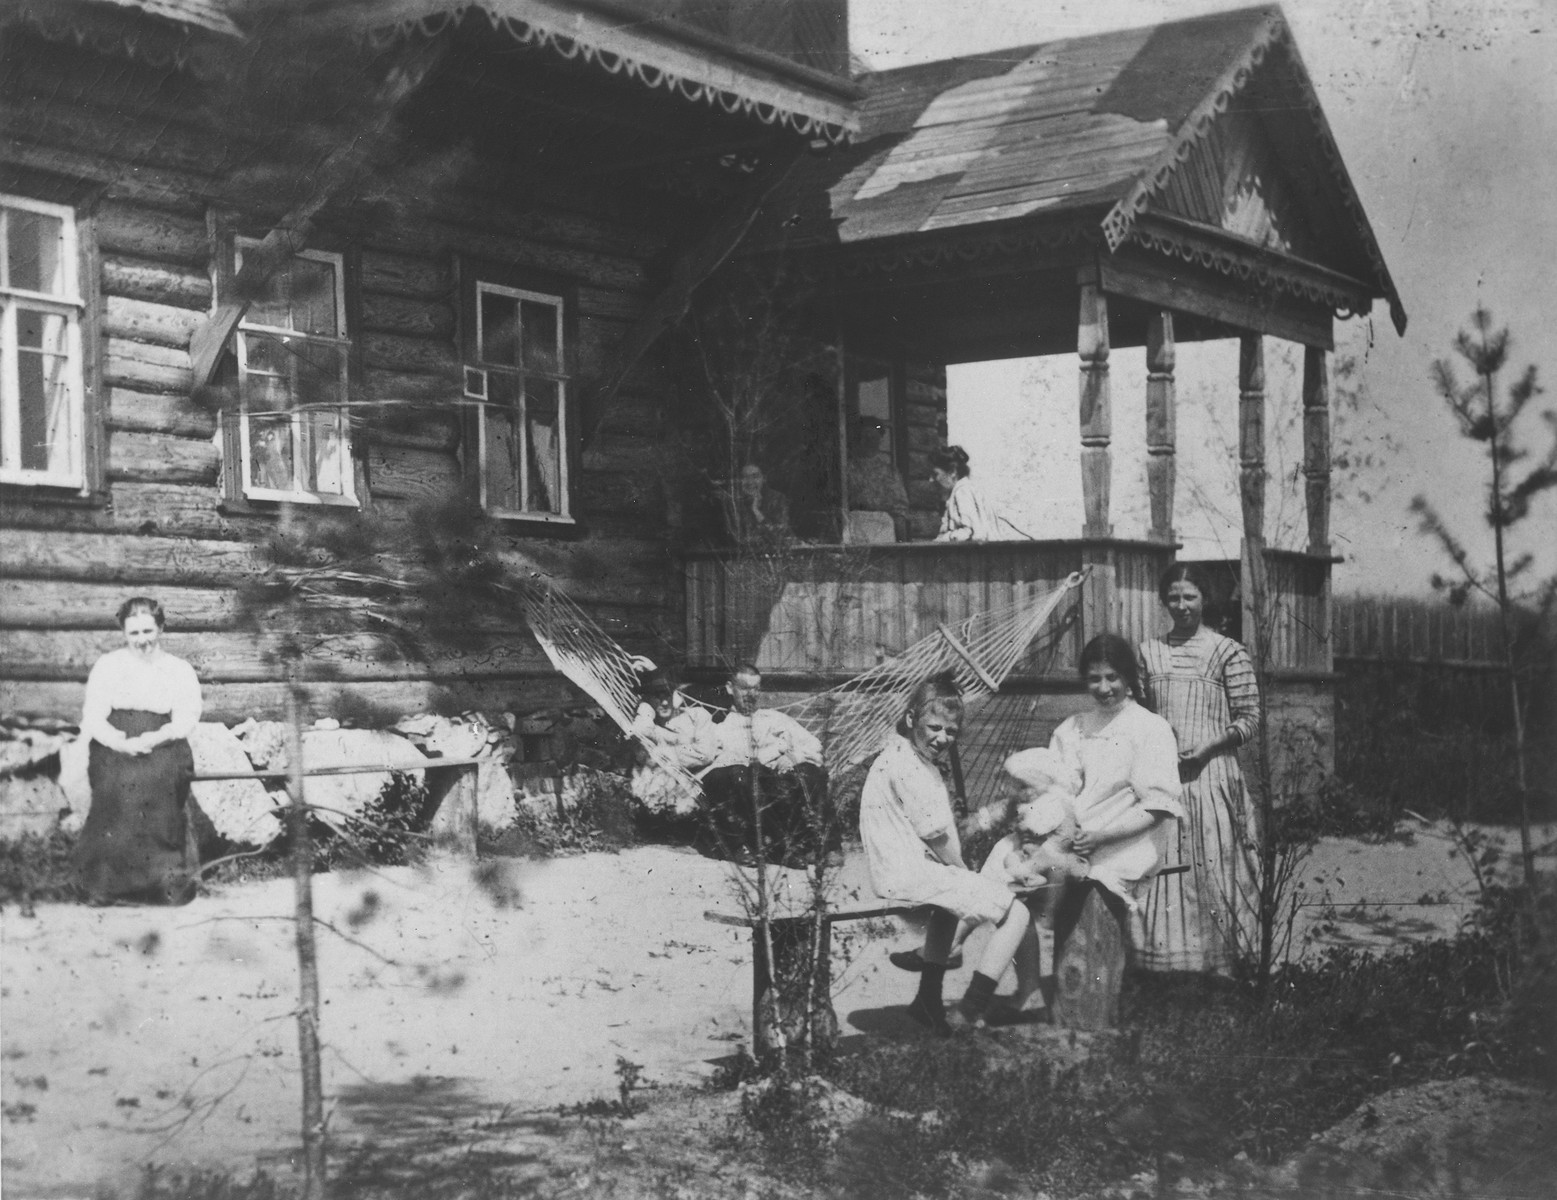 Portrait of the Mikolaevsky family at their dacha in the village of Strelna, a suburb of St. Petersburg.